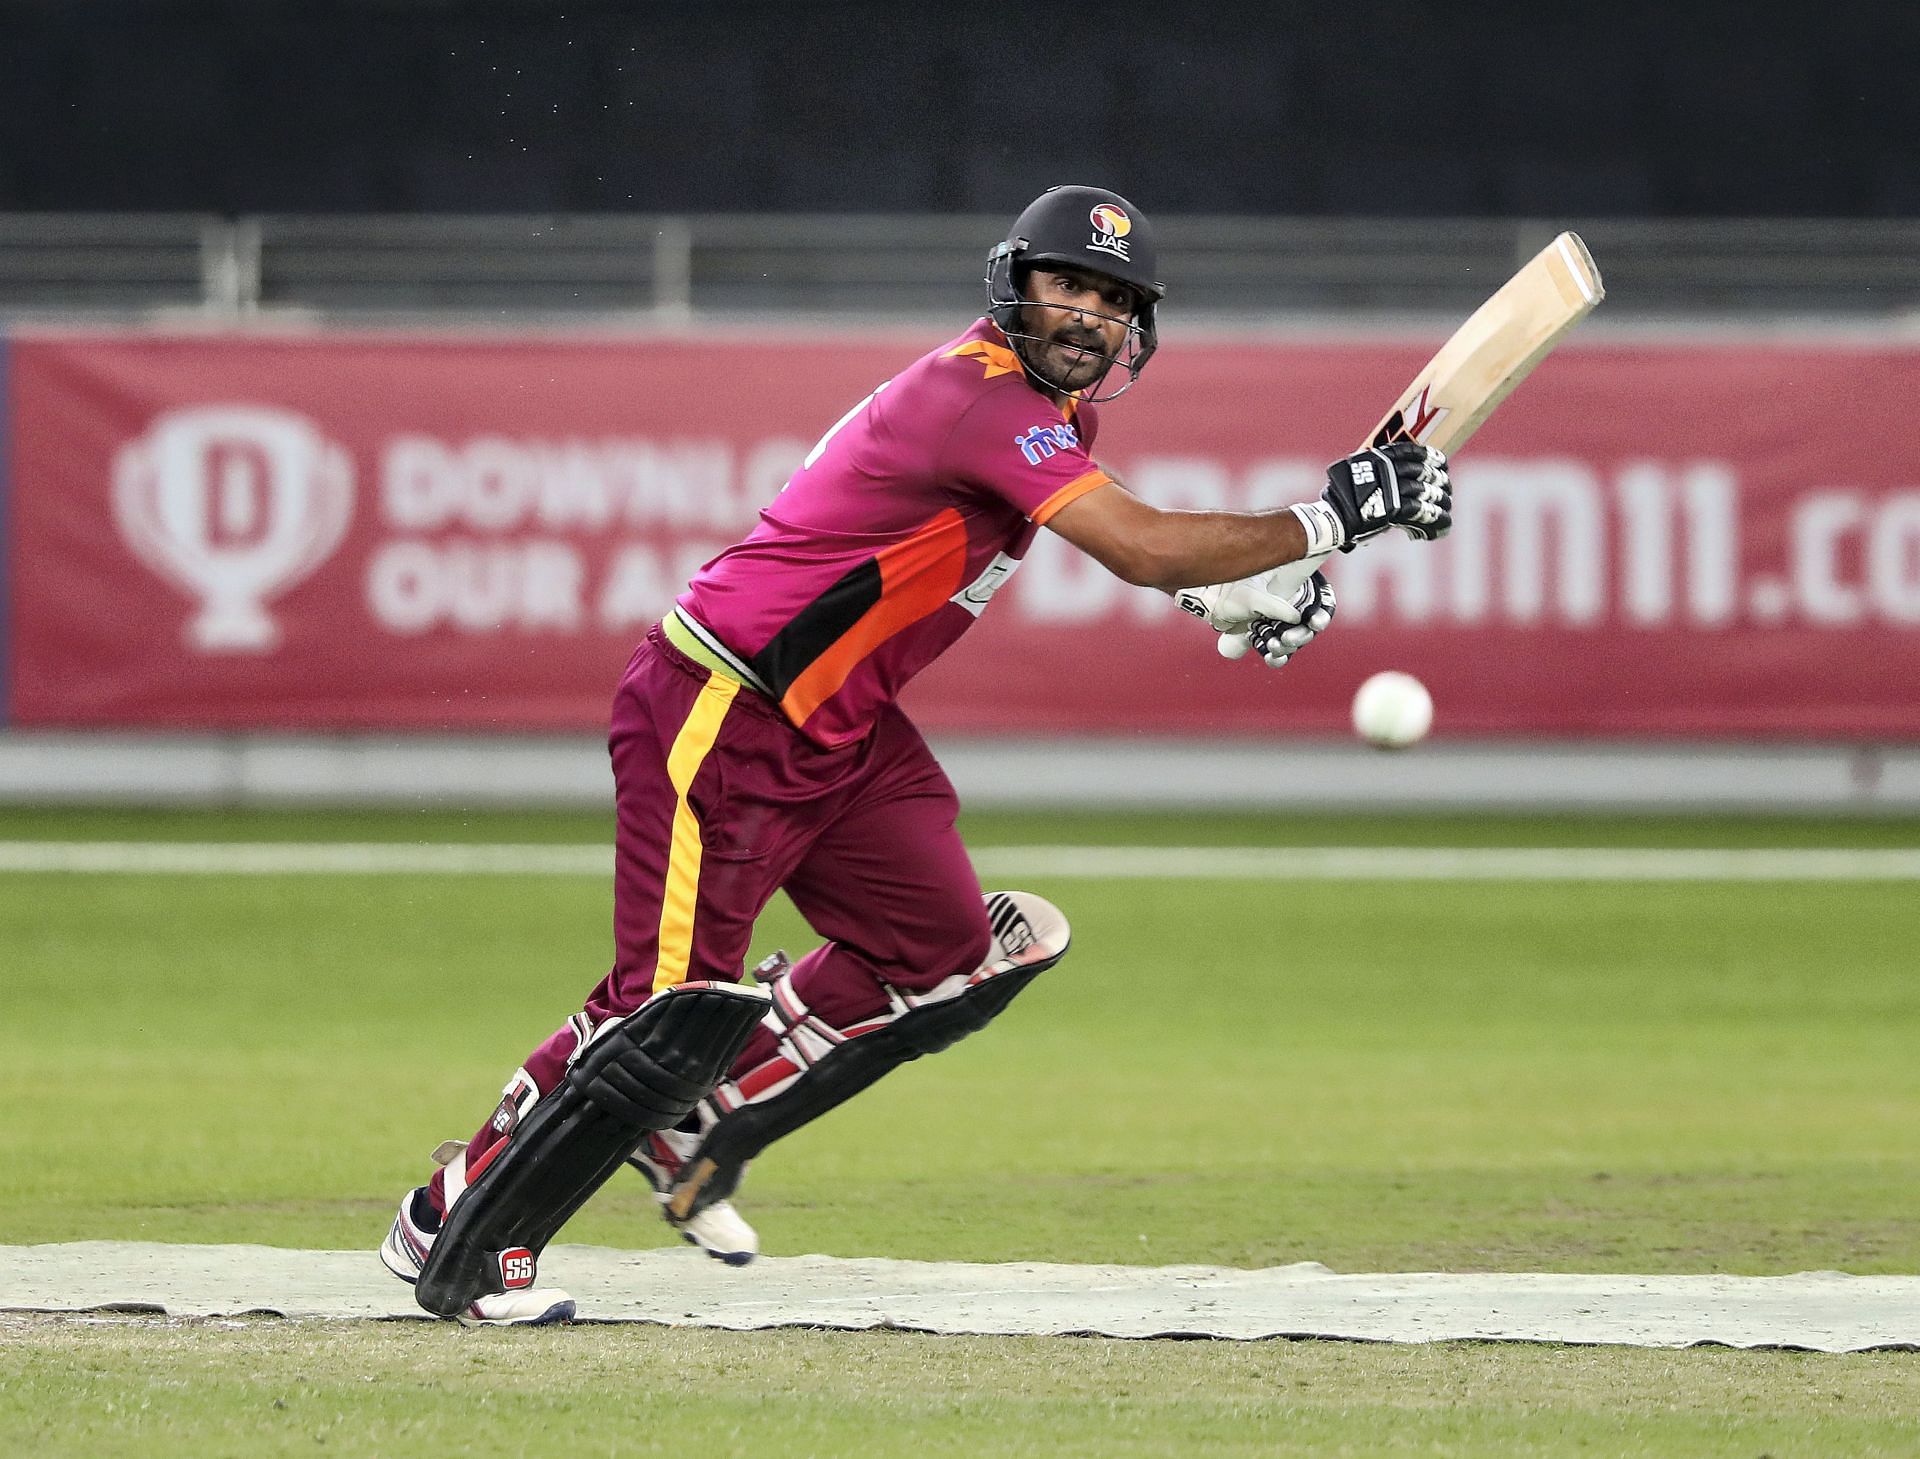 Asif Khan in action (Image Courtesy: The National)